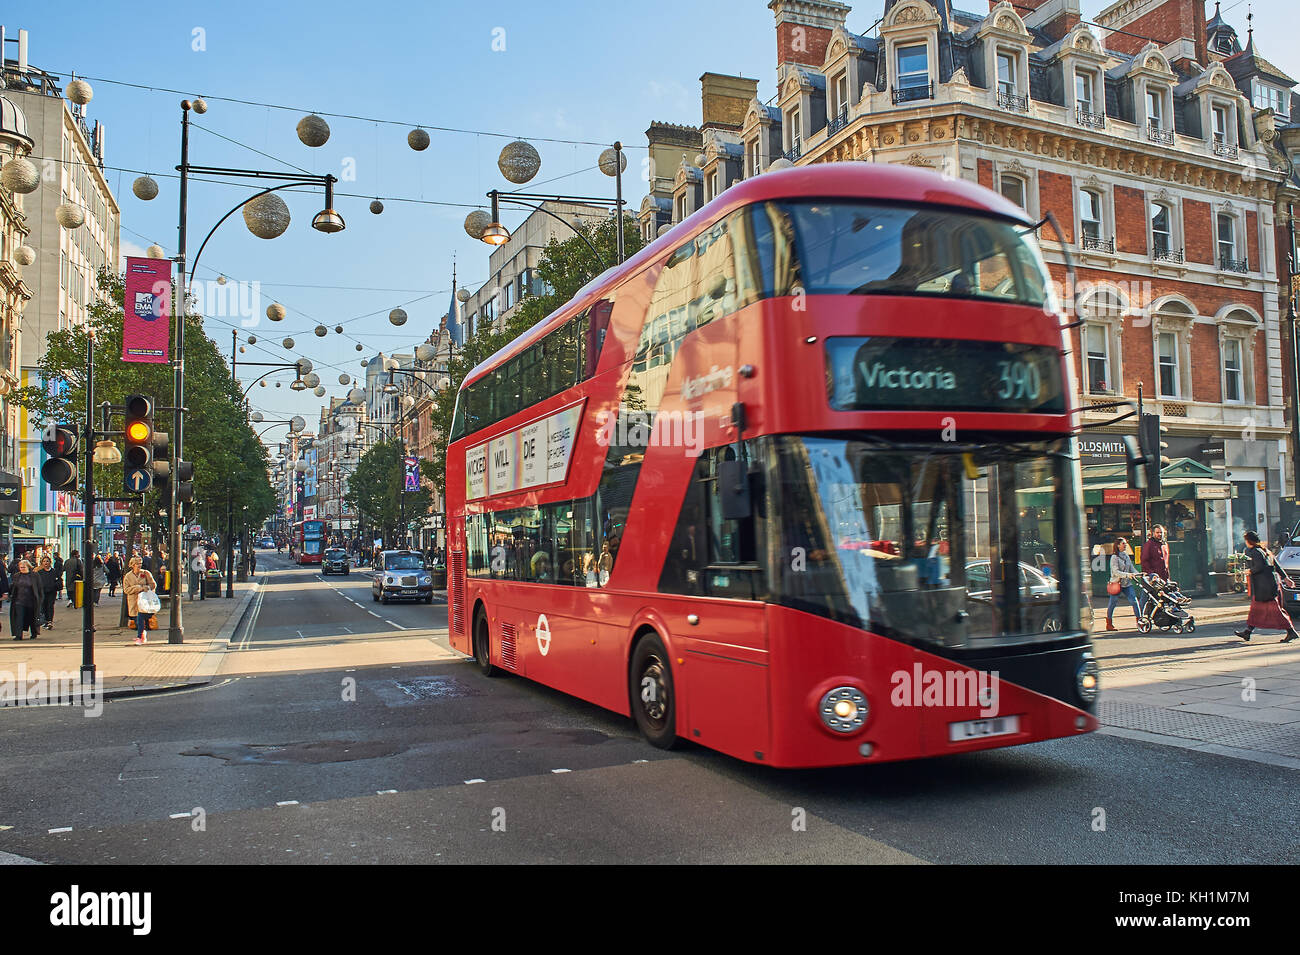 A red double decker bus in London's West End travels down Oxford Street Stock Photo